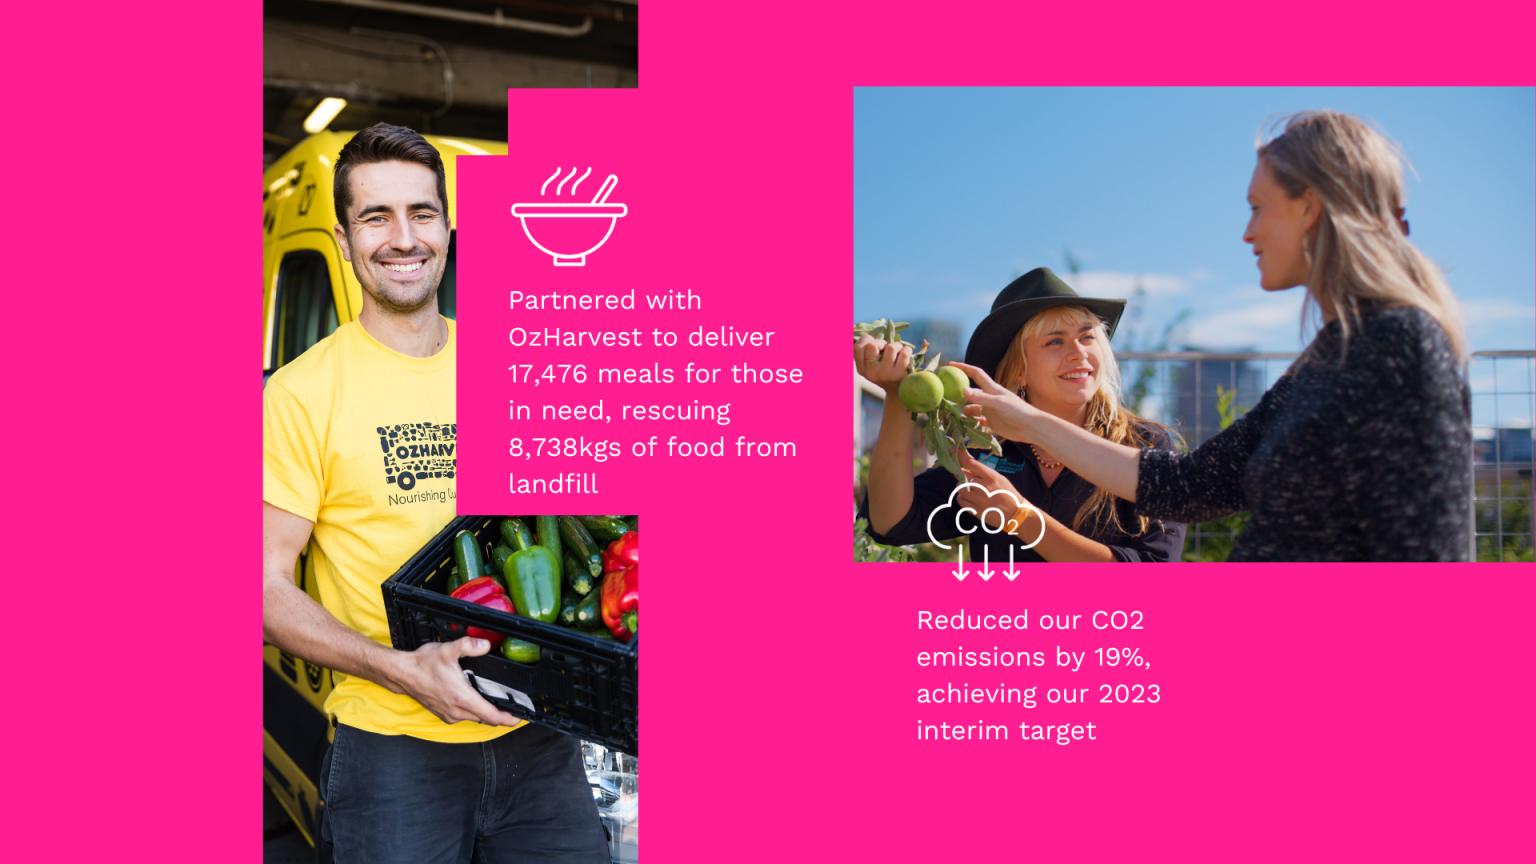 Partnered with OzHarvest to deliver 17,476 meals for those in need, rescuing 8,738kgs of food from landfill. Reduced our CO2 emissions by 19%, achieving our 2023 interim target.